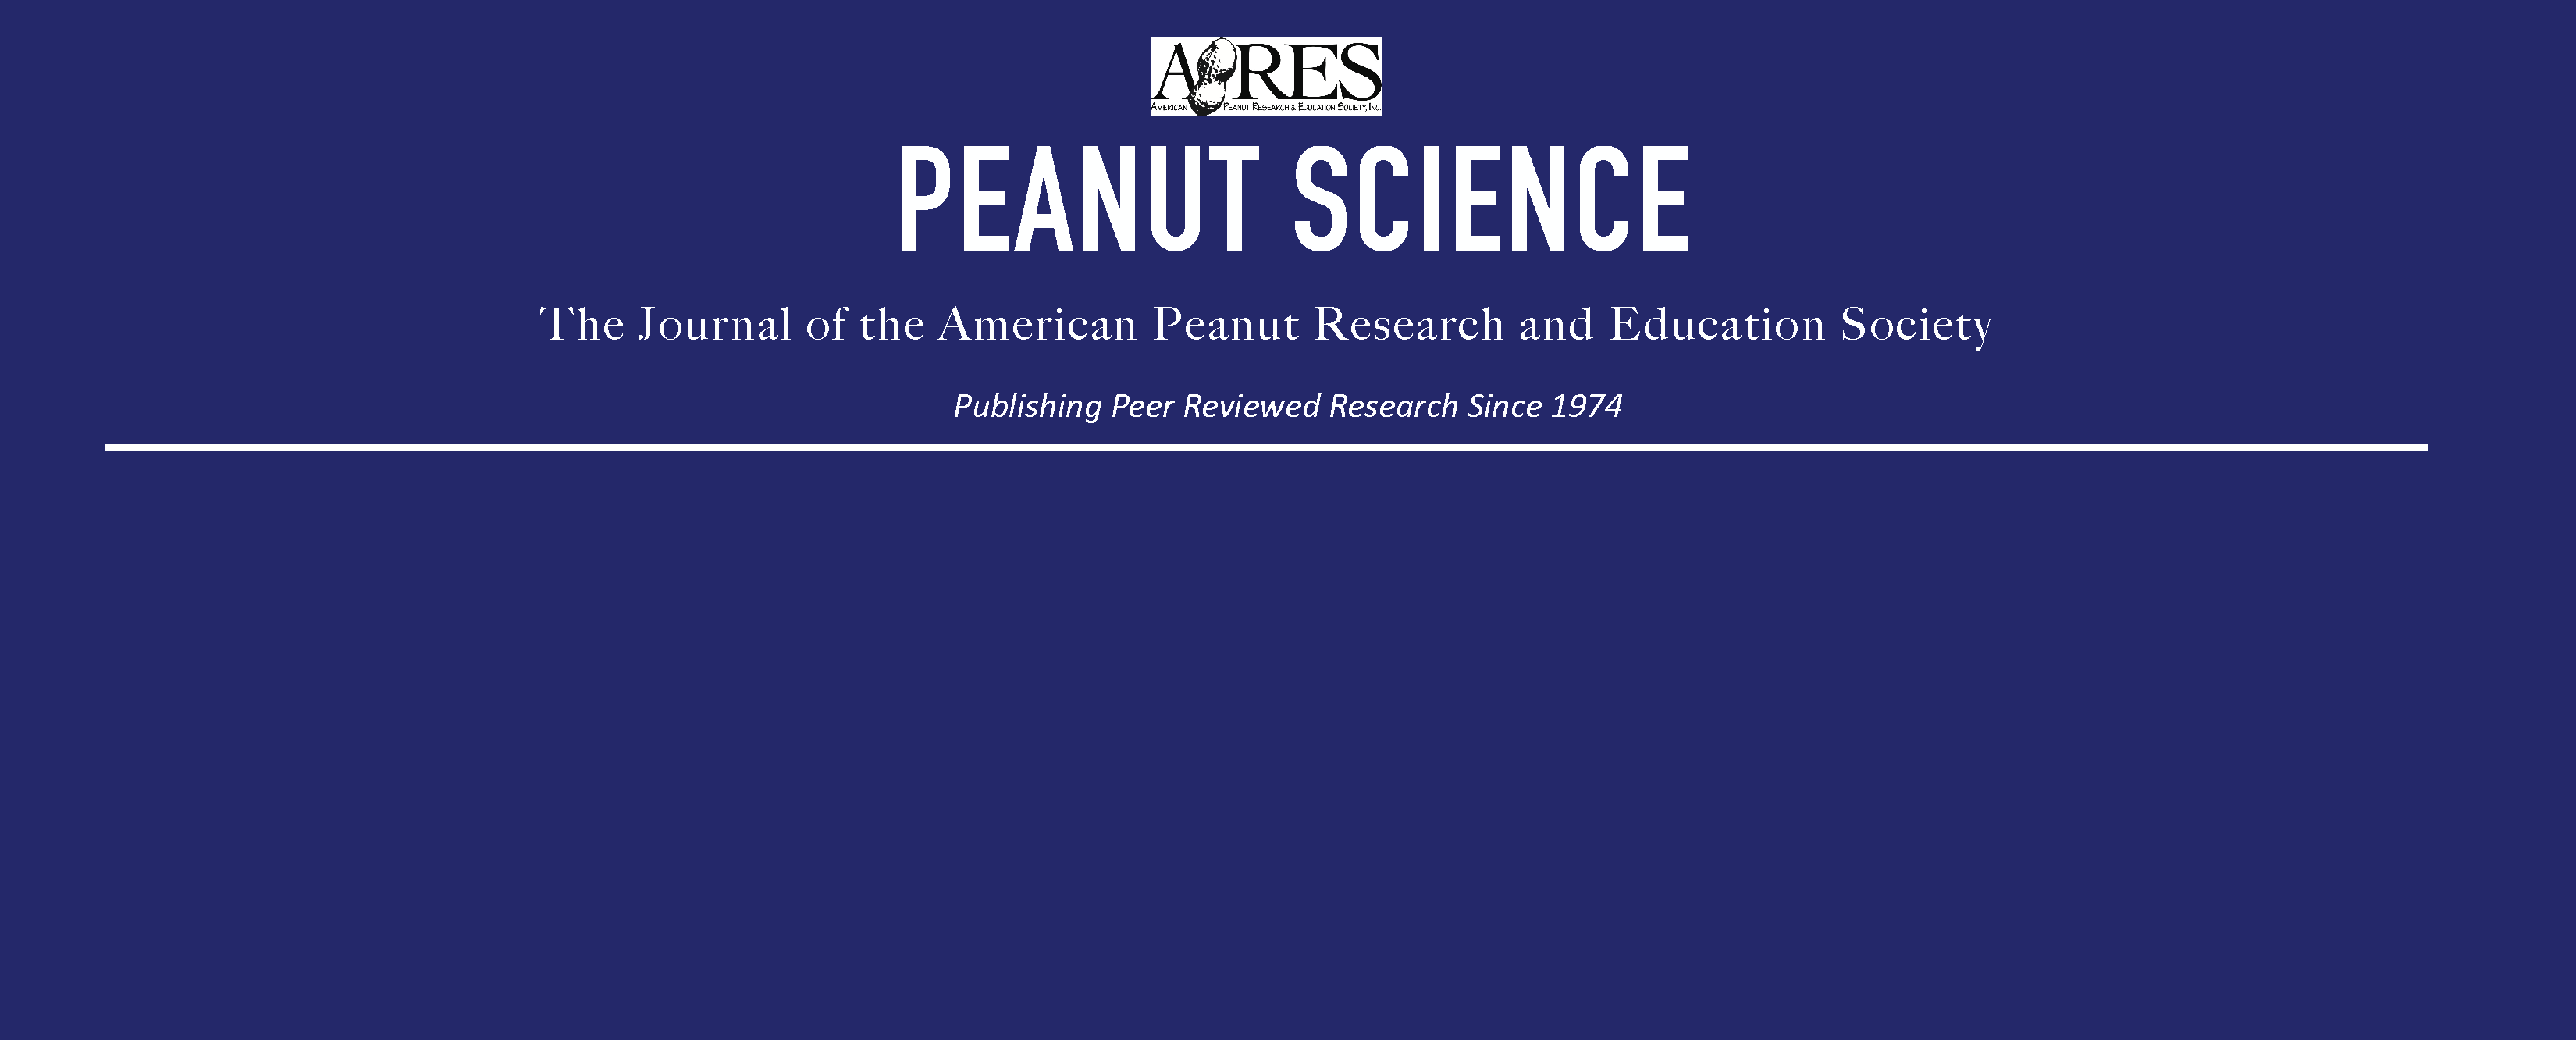 Effects of Succinic Acid 2,2-Dimethylhydrazide on Yield and Other Characteristics of Peanut Cultivars¹